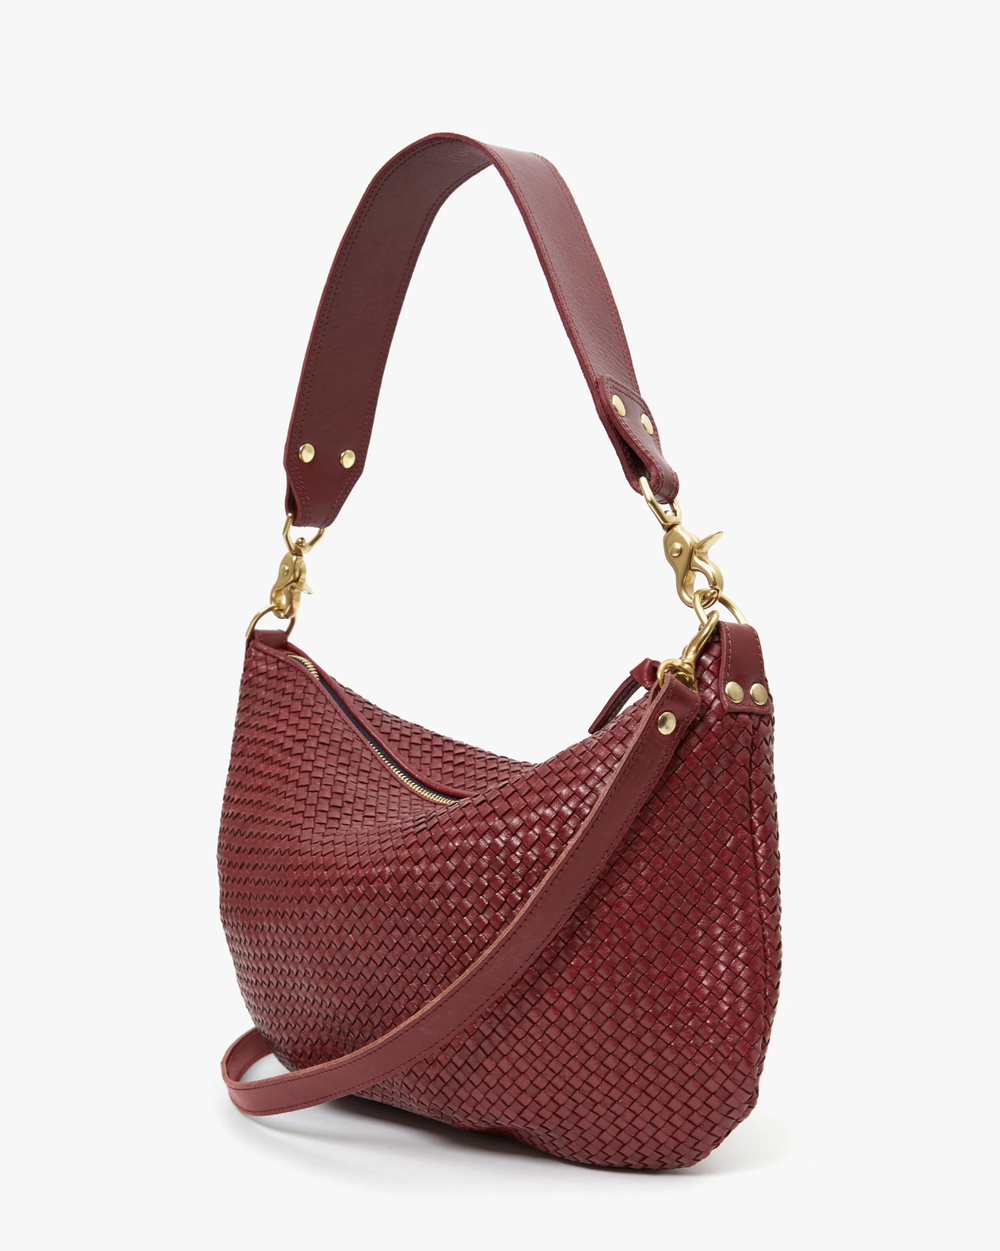 Clare V. Mint Woven Leather Crossbody Bag